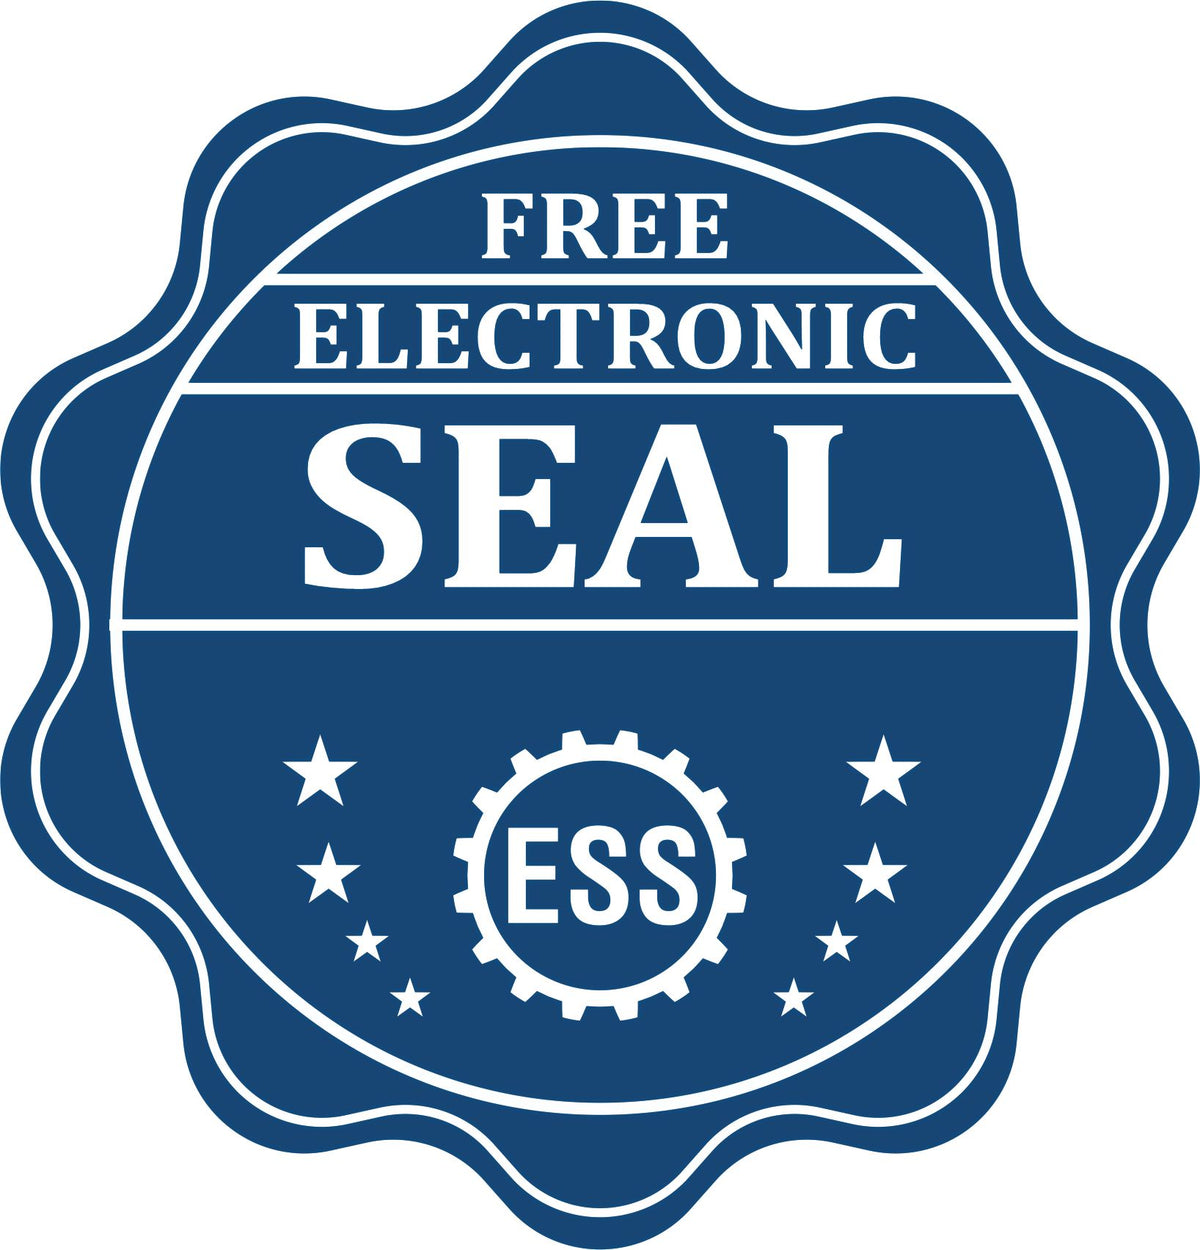 A badge showing a free electronic seal for the Premium MaxLight Pre-Inked South Dakota Landscape Architectural Stamp with stars and the ESS gear on the emblem.